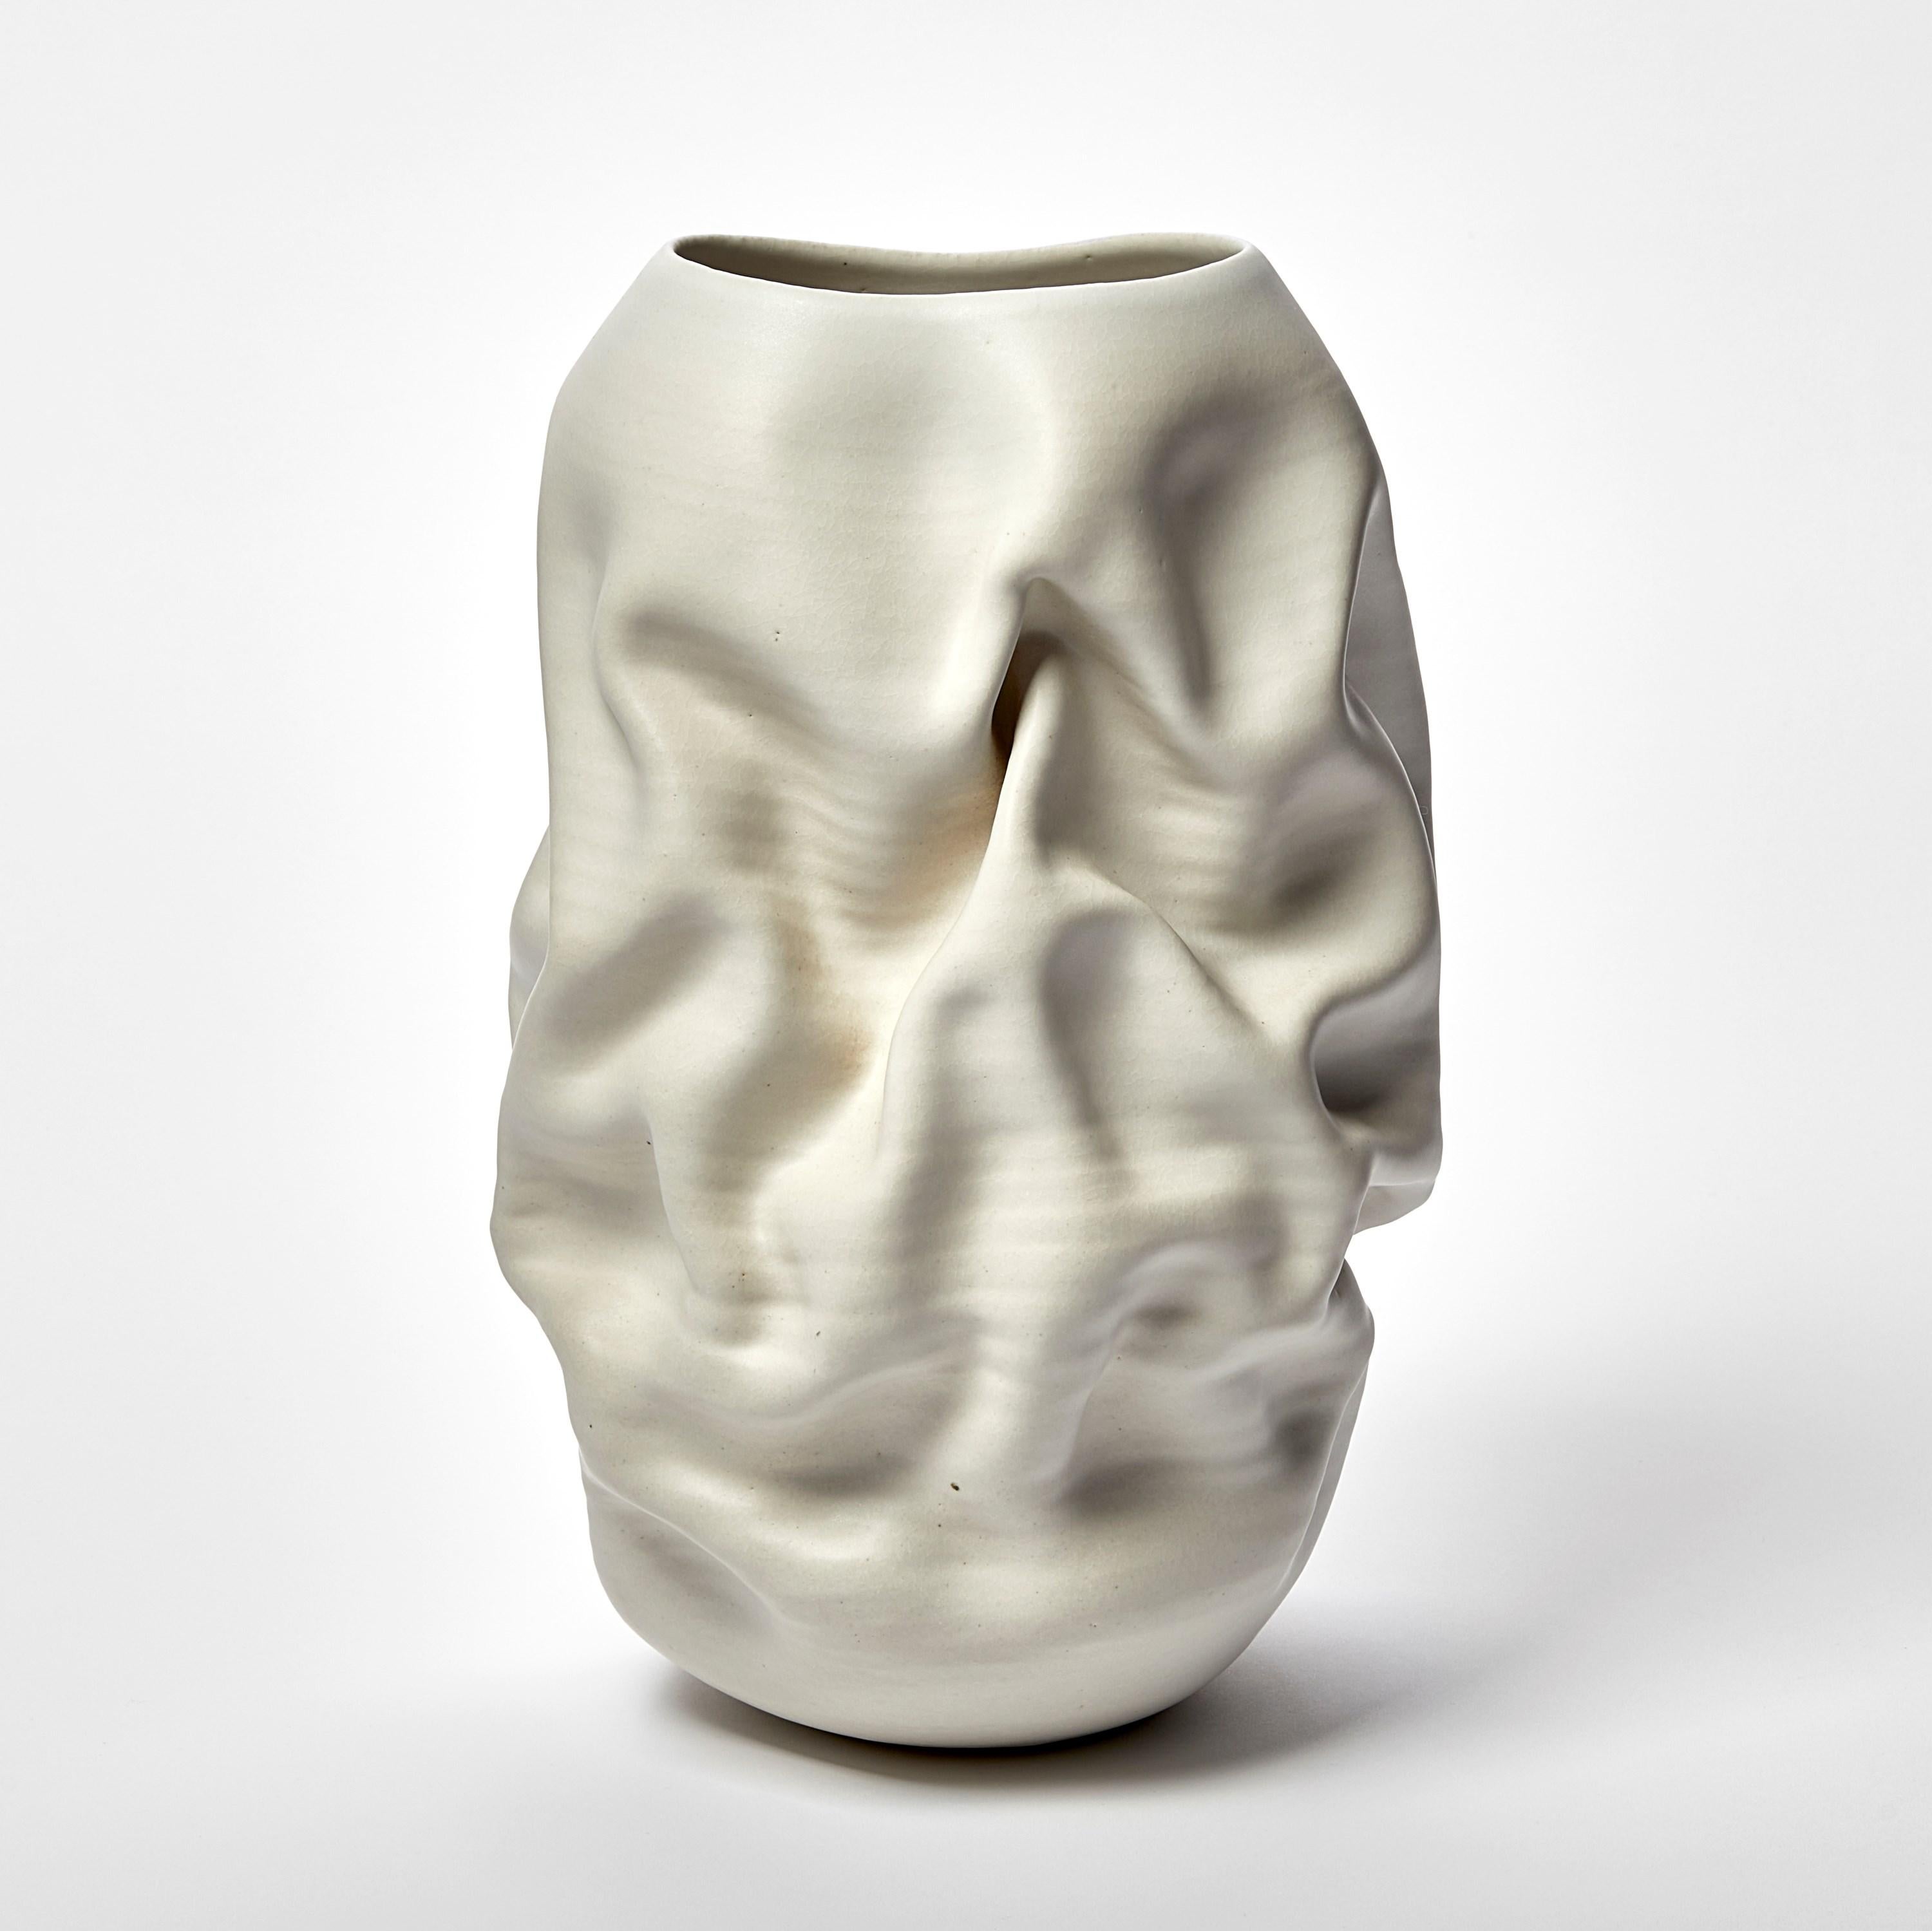 ‘Tall Crumpled Form No 118’ is a unique sculptural vessel by the British artist, Nicholas Arroyave-Portela.

Nicholas Arroyave-Portela’s professional ceramic practise began in 1994. After 20 years based in London, he moved and set up his studio in